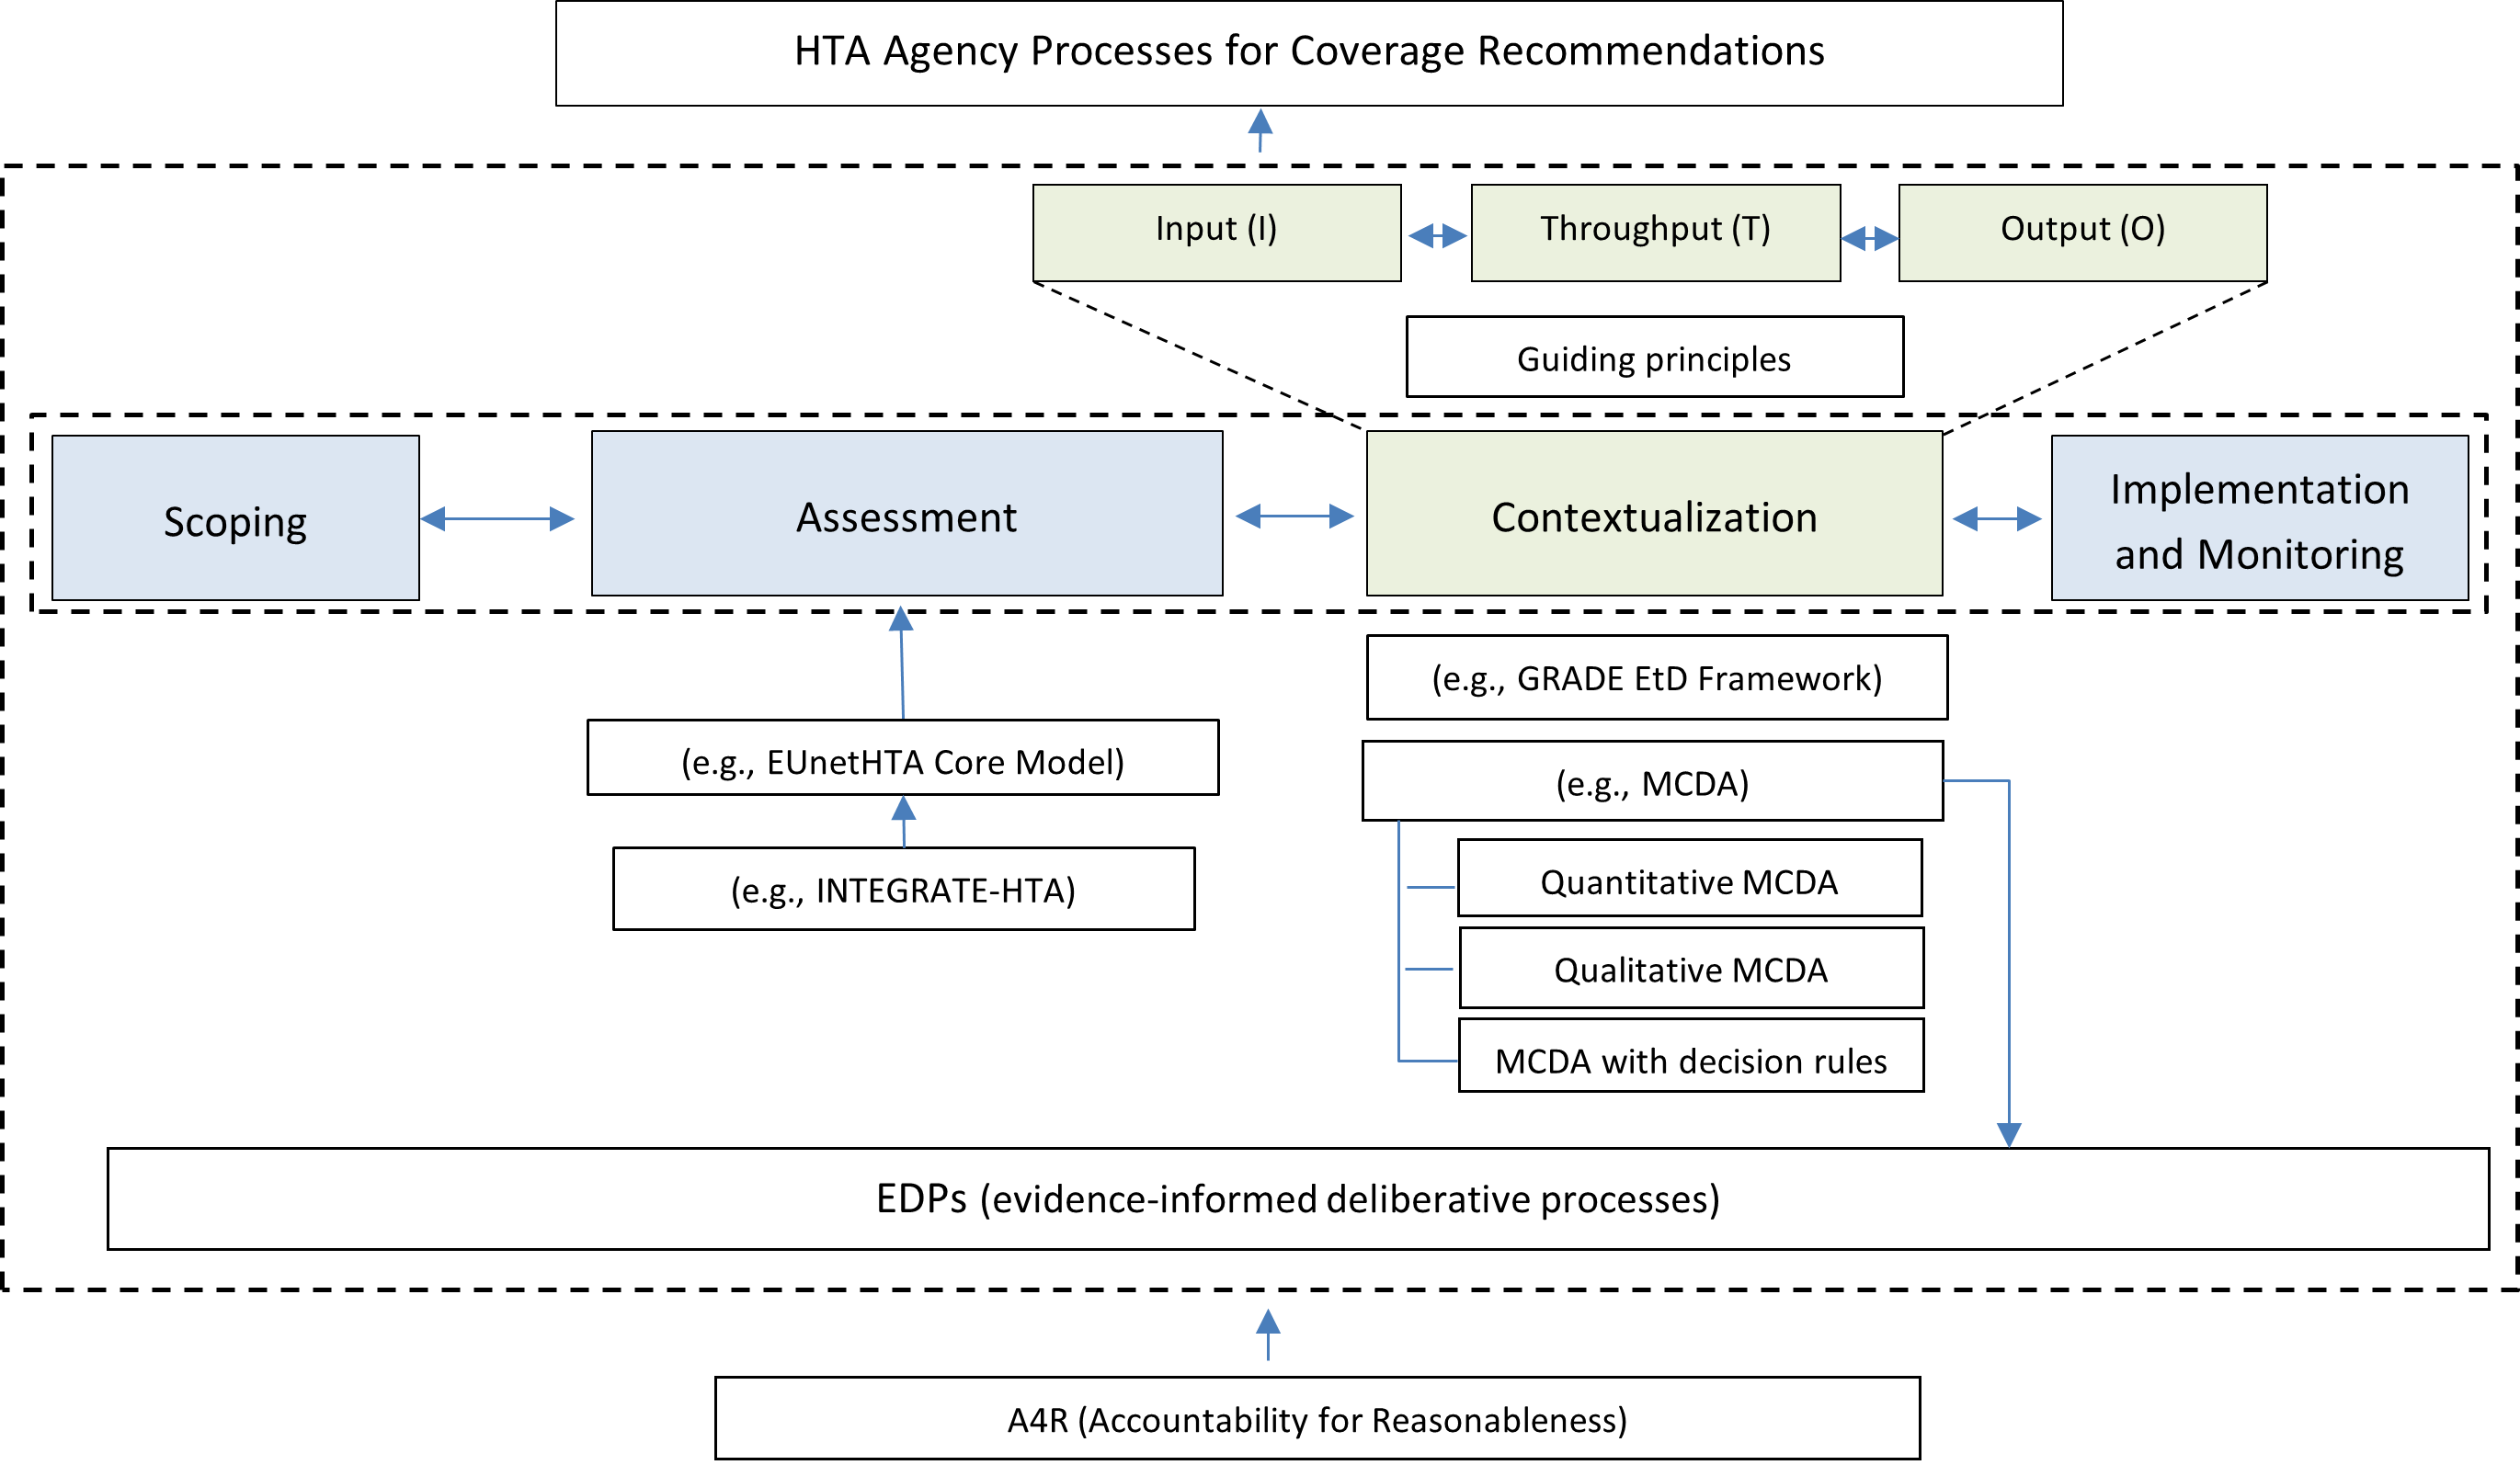 Alt-text: Conceptualization of the evidence that informs HTA agency processes for reimbursement or coverage recommendations using the HTA process (scoping, assessment, contextualization, implementation, and monitoring) as an anchor. The figure provides examples of existing frameworks and illustrates how they are intended to function within the context of the HTA process.